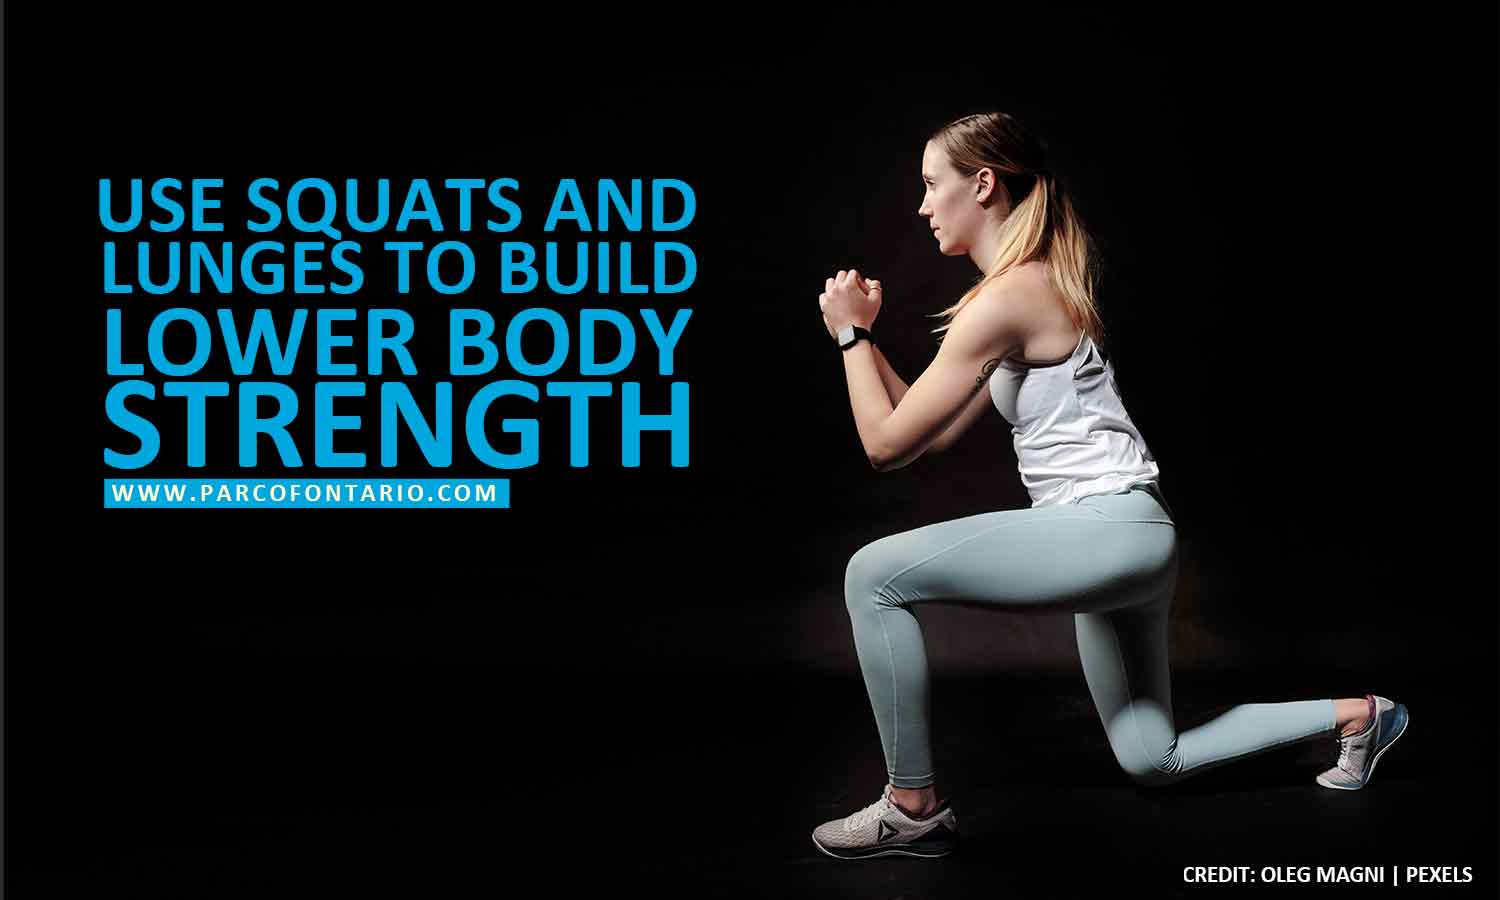 Use squats and lunges to build lower body strength